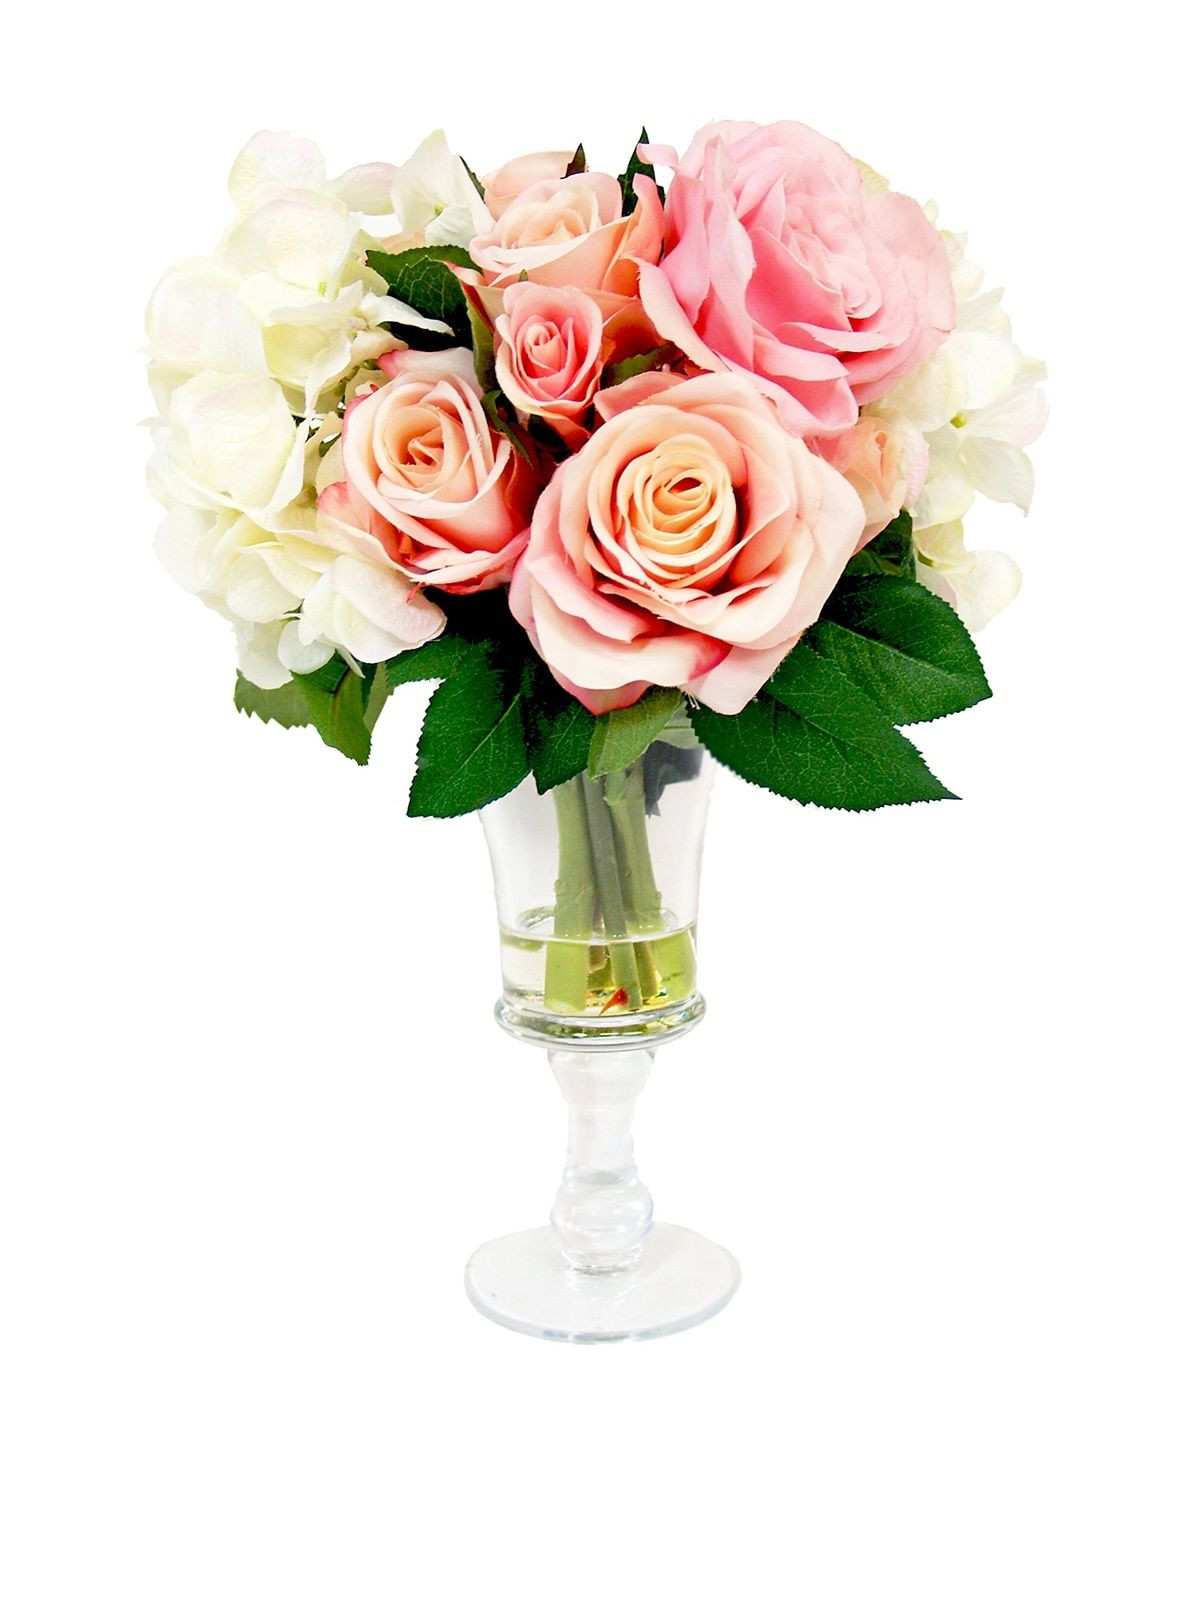 27 Great Vase with White Roses 2024 free download vase with white roses of creative displays roses with hydrangeas bouquet pink white green at intended for creative displays roses with hydrangeas bouquet pink white green at myhabit